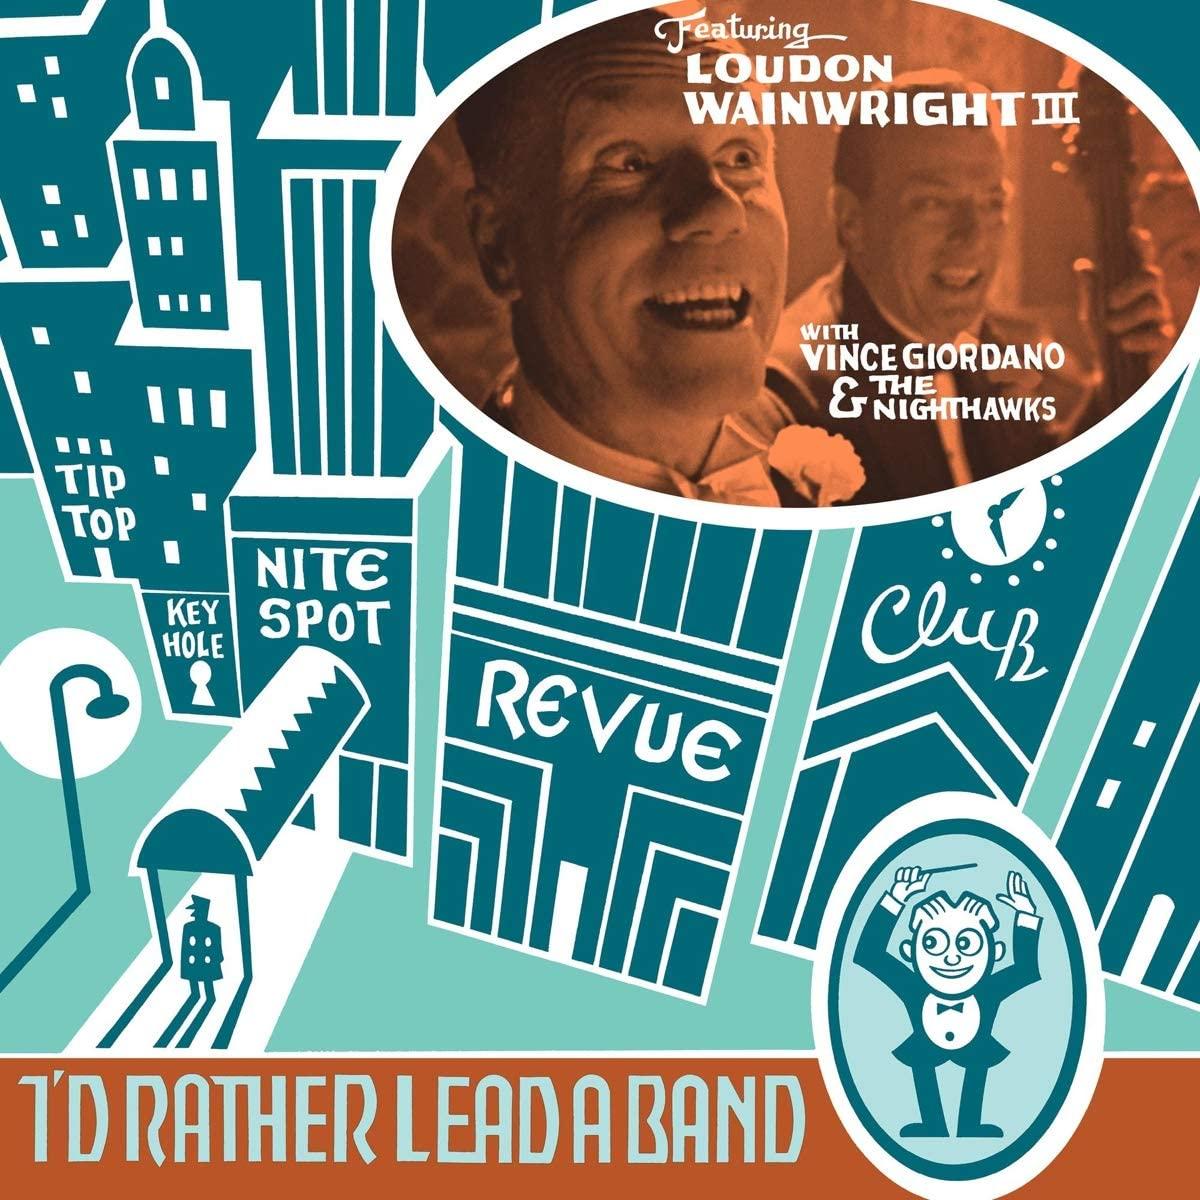 Loudon Wainwright - I'd rather lead a band